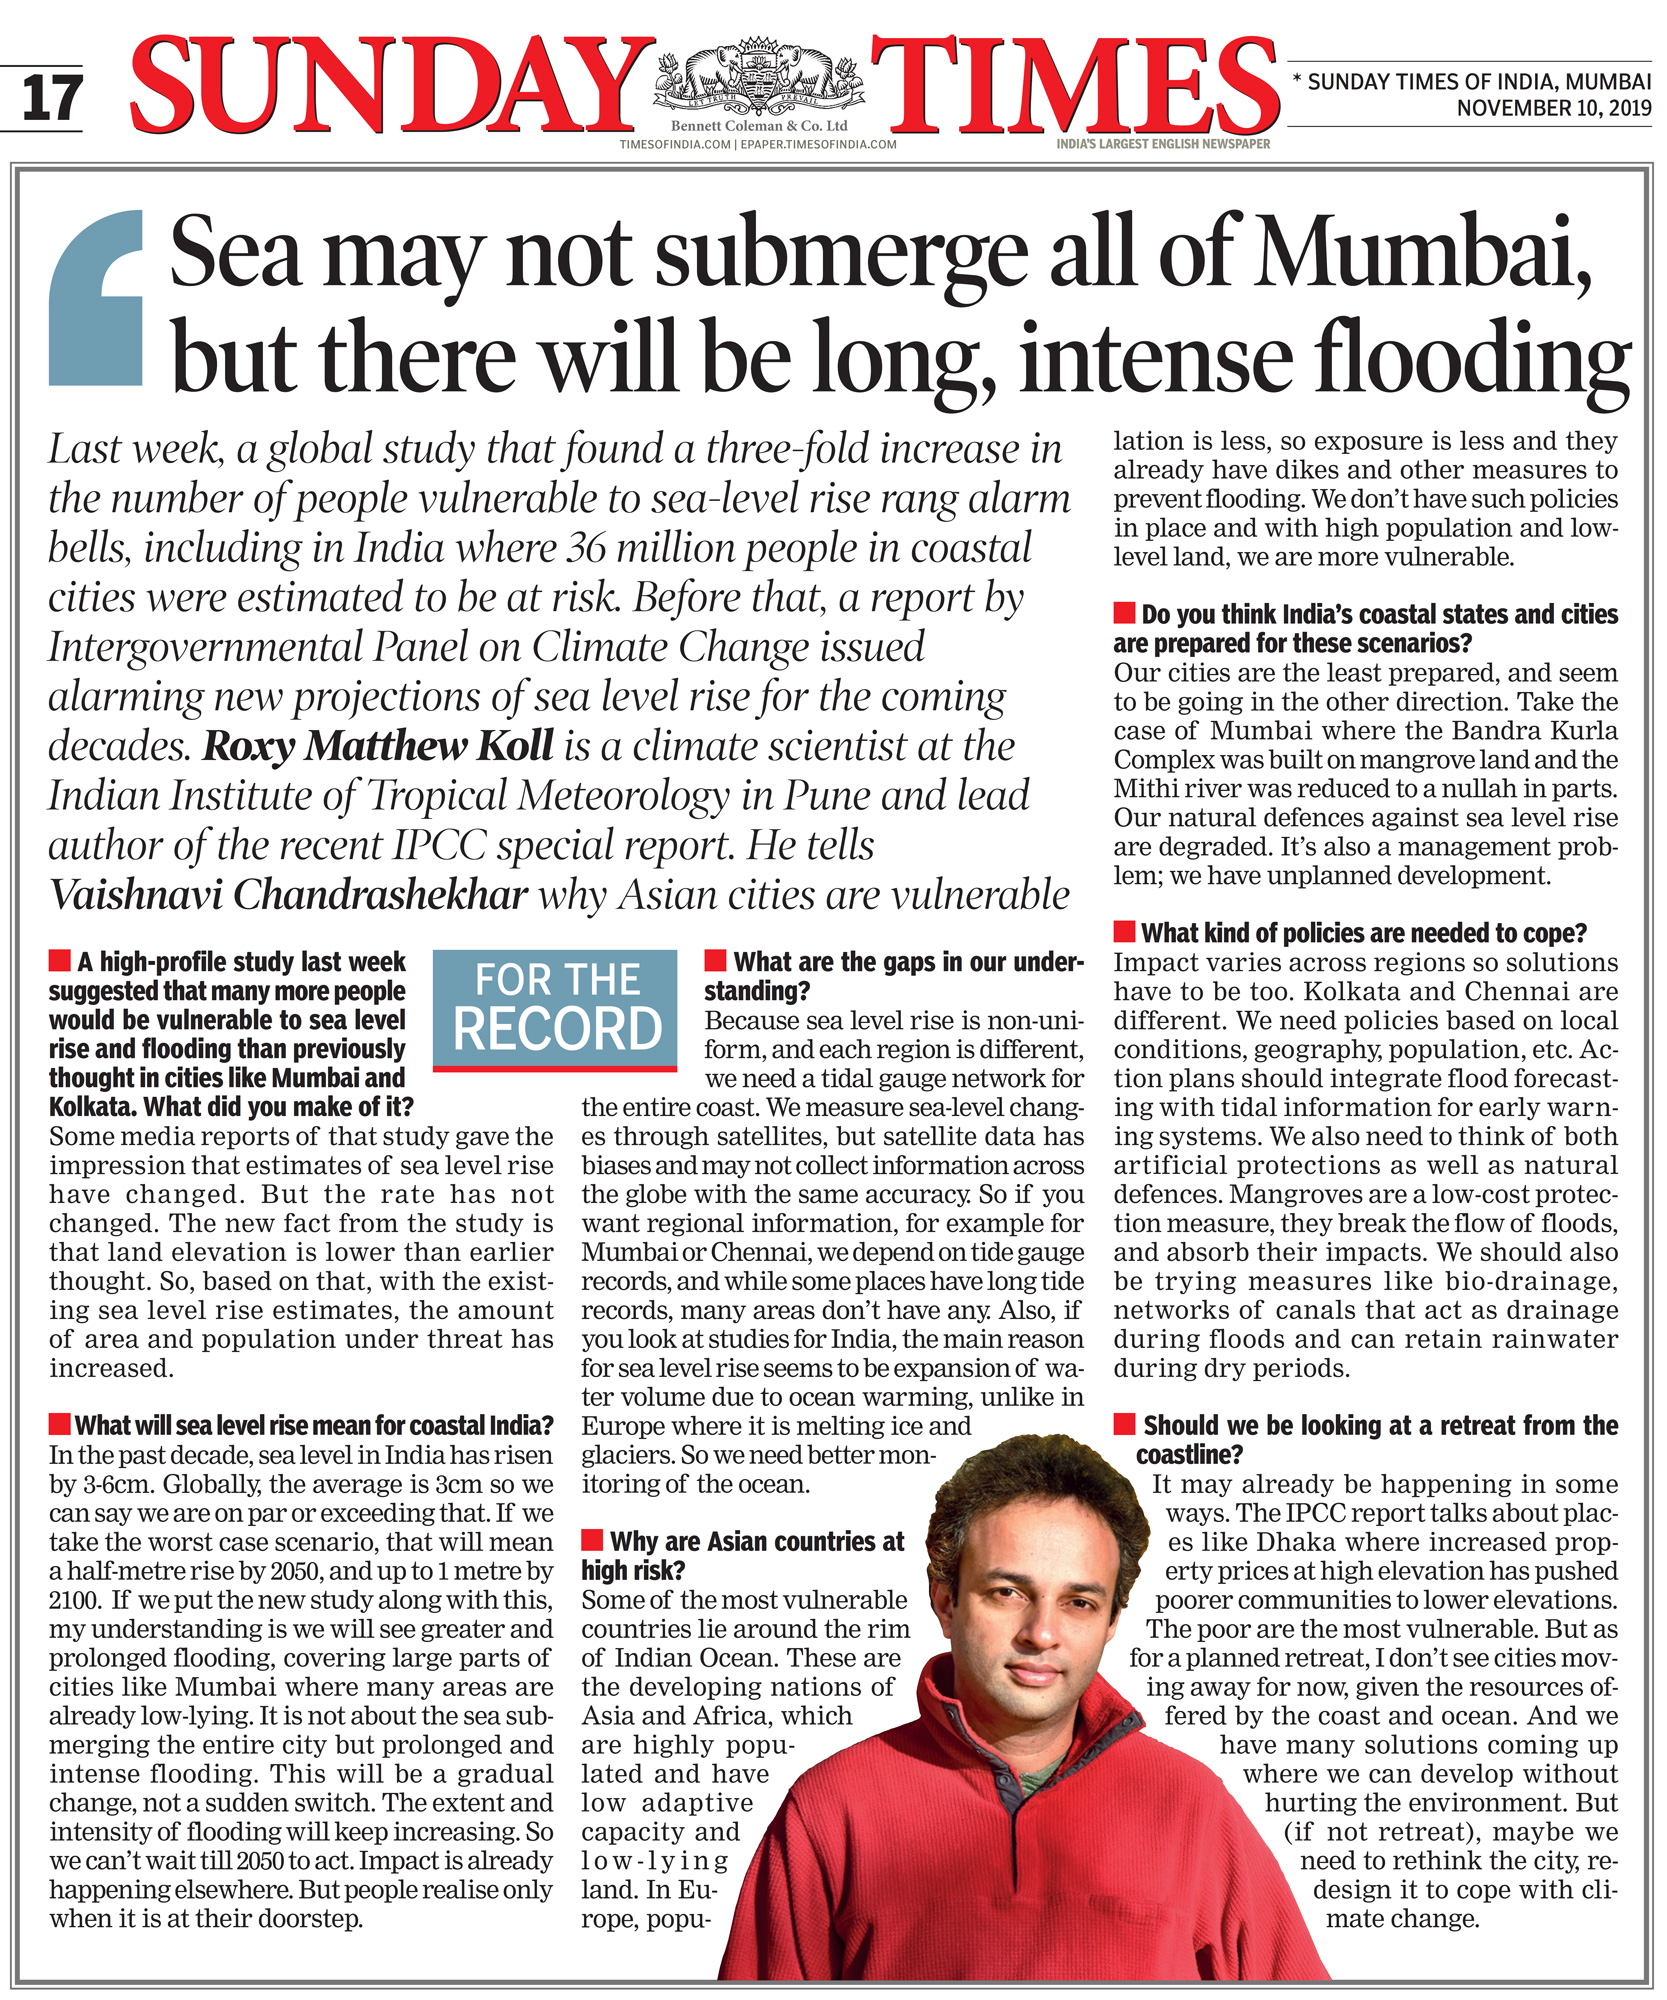 Times of India news interview with Roxy Mathew Koll on sea level rise over Mumbai